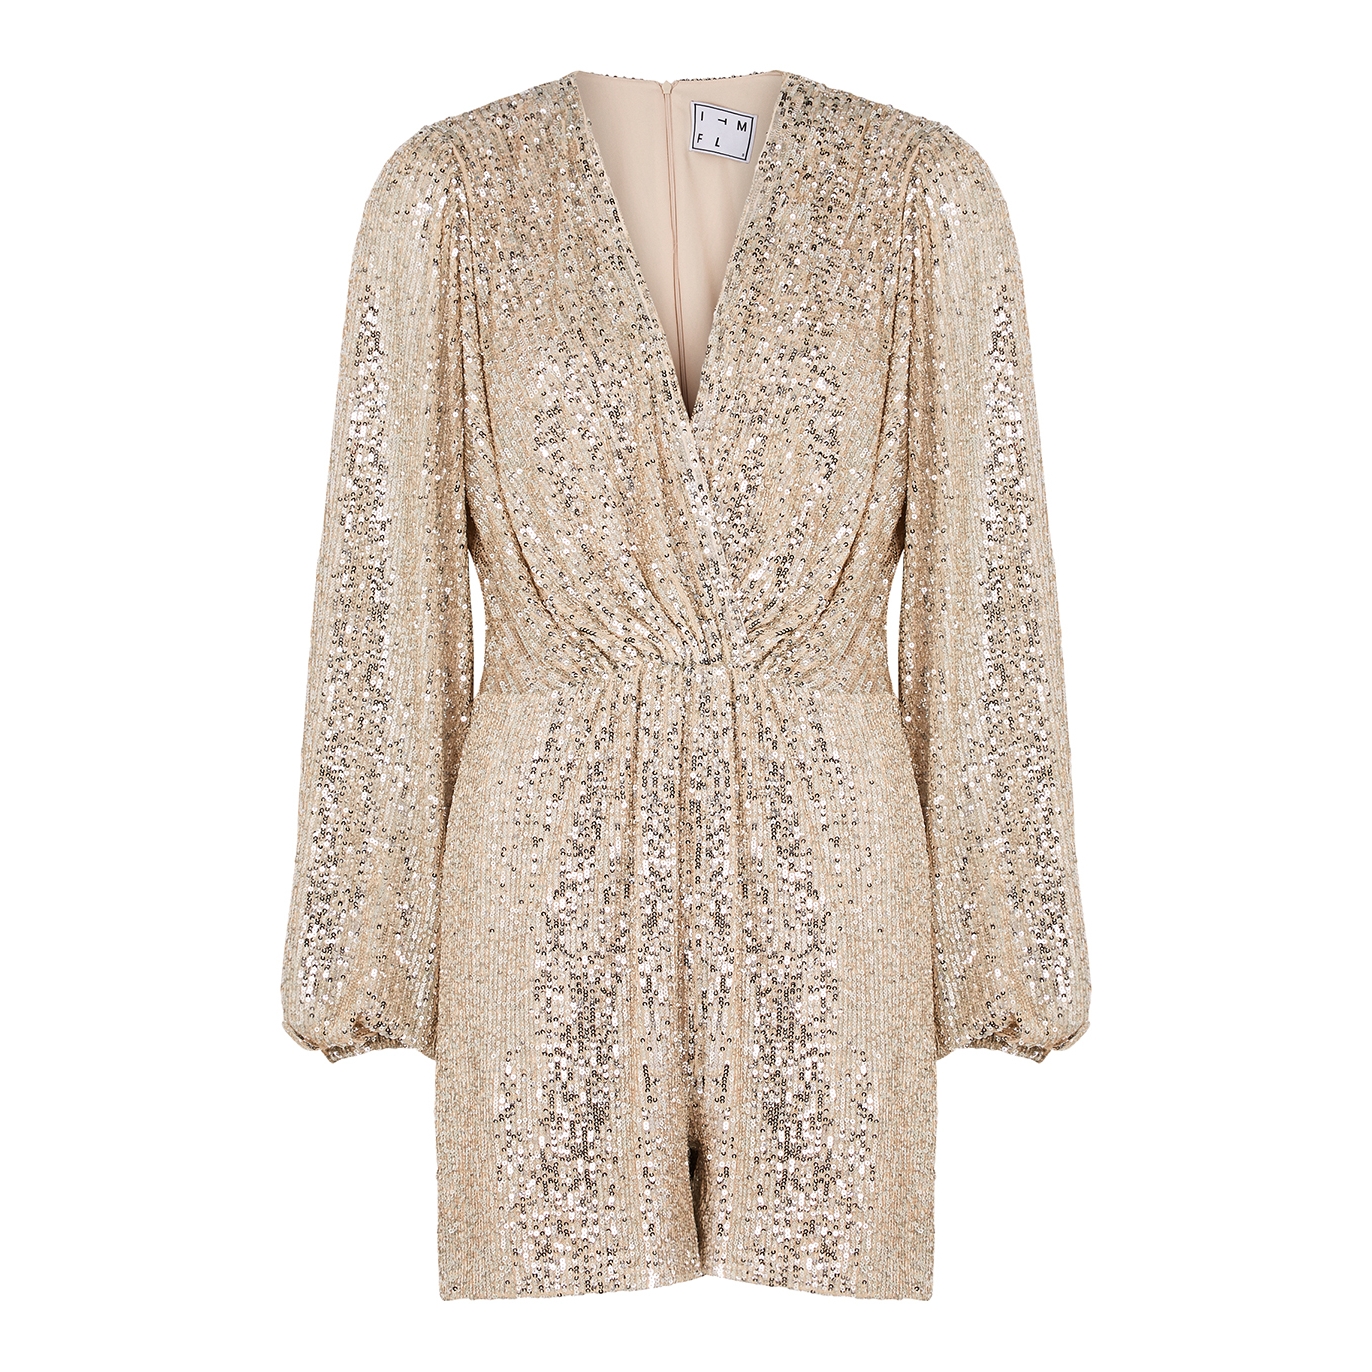 IN The Mood For Love Bjork Silver Sequin Playsuit - S